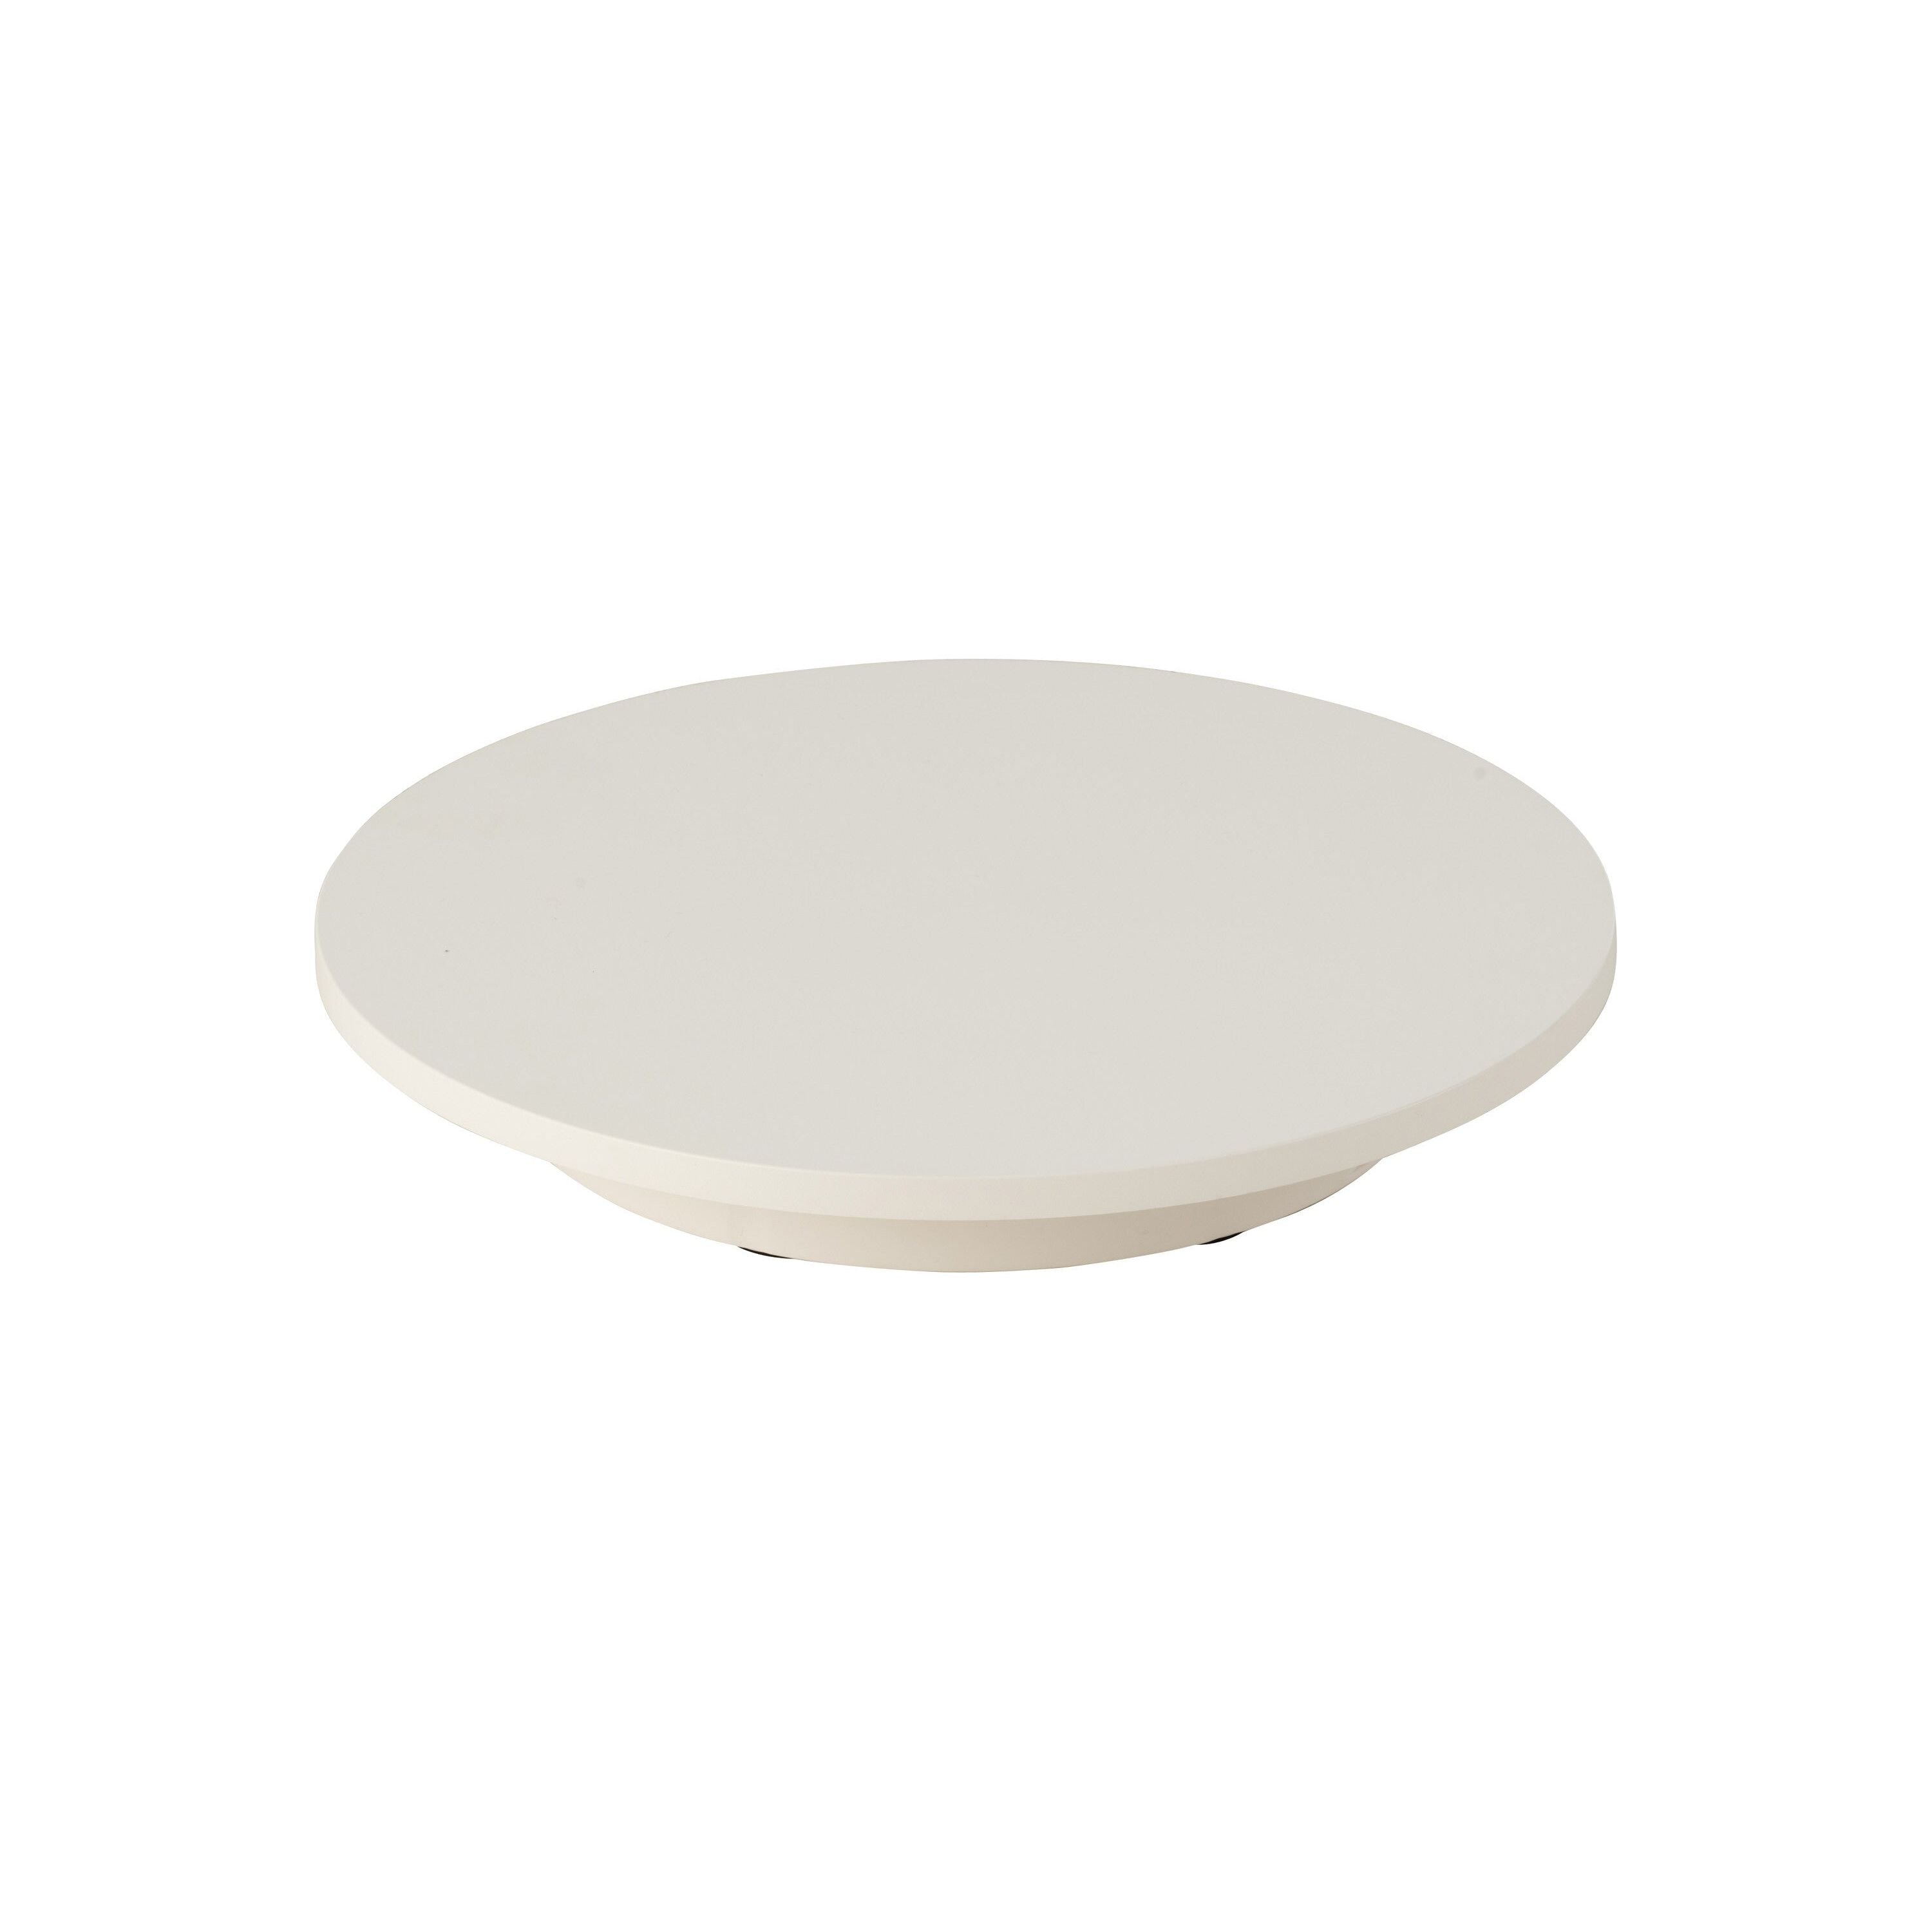 Turntable Round 100kg Plastic White Small